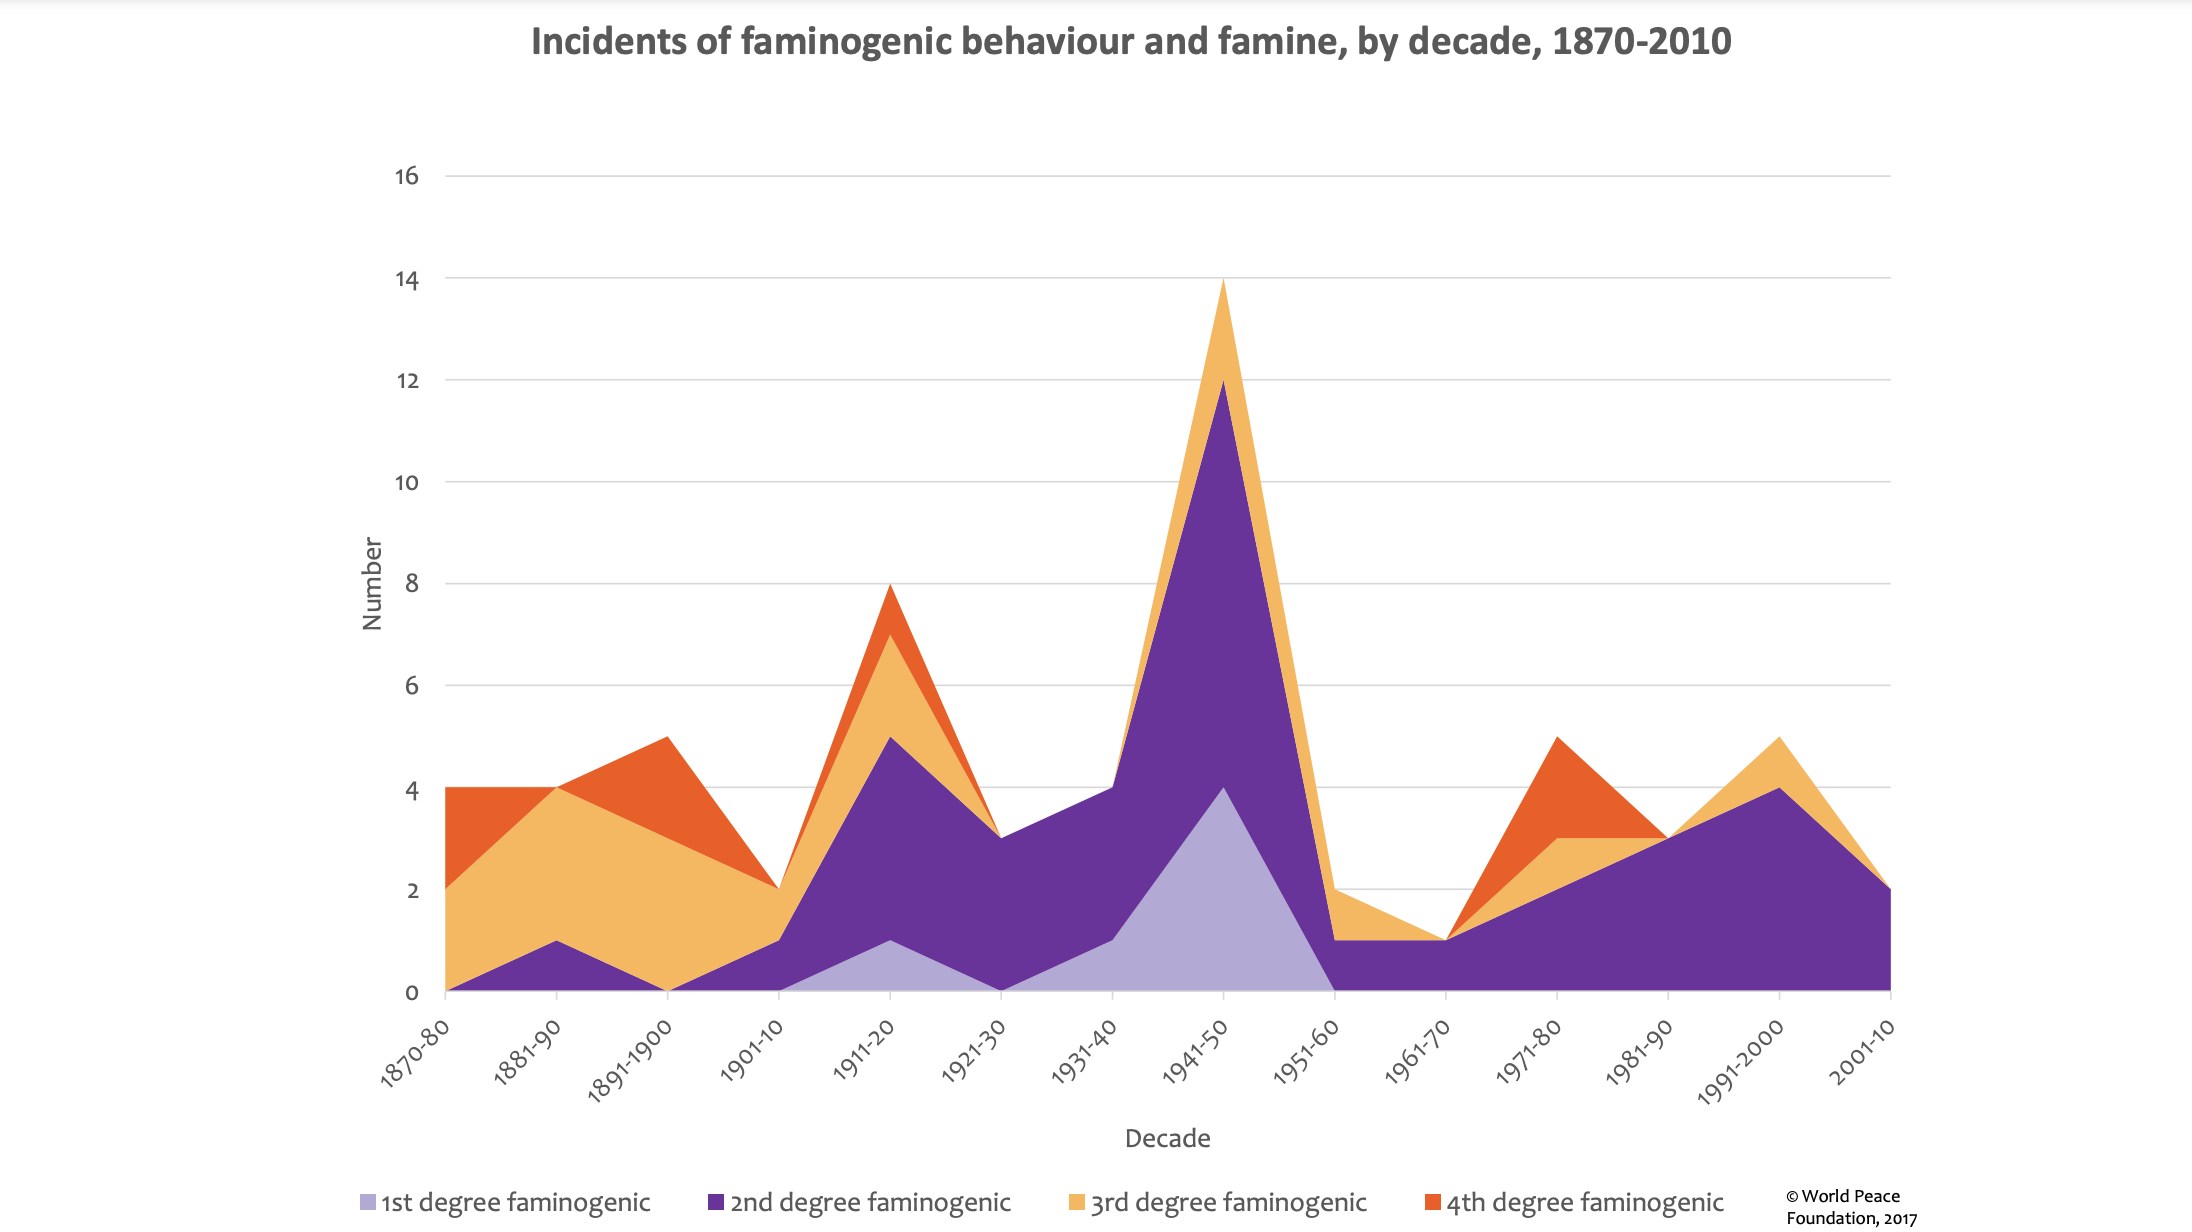 Graph indicating incidents of faminogenic behaviour and famine, by decade from 1870 to 2010.